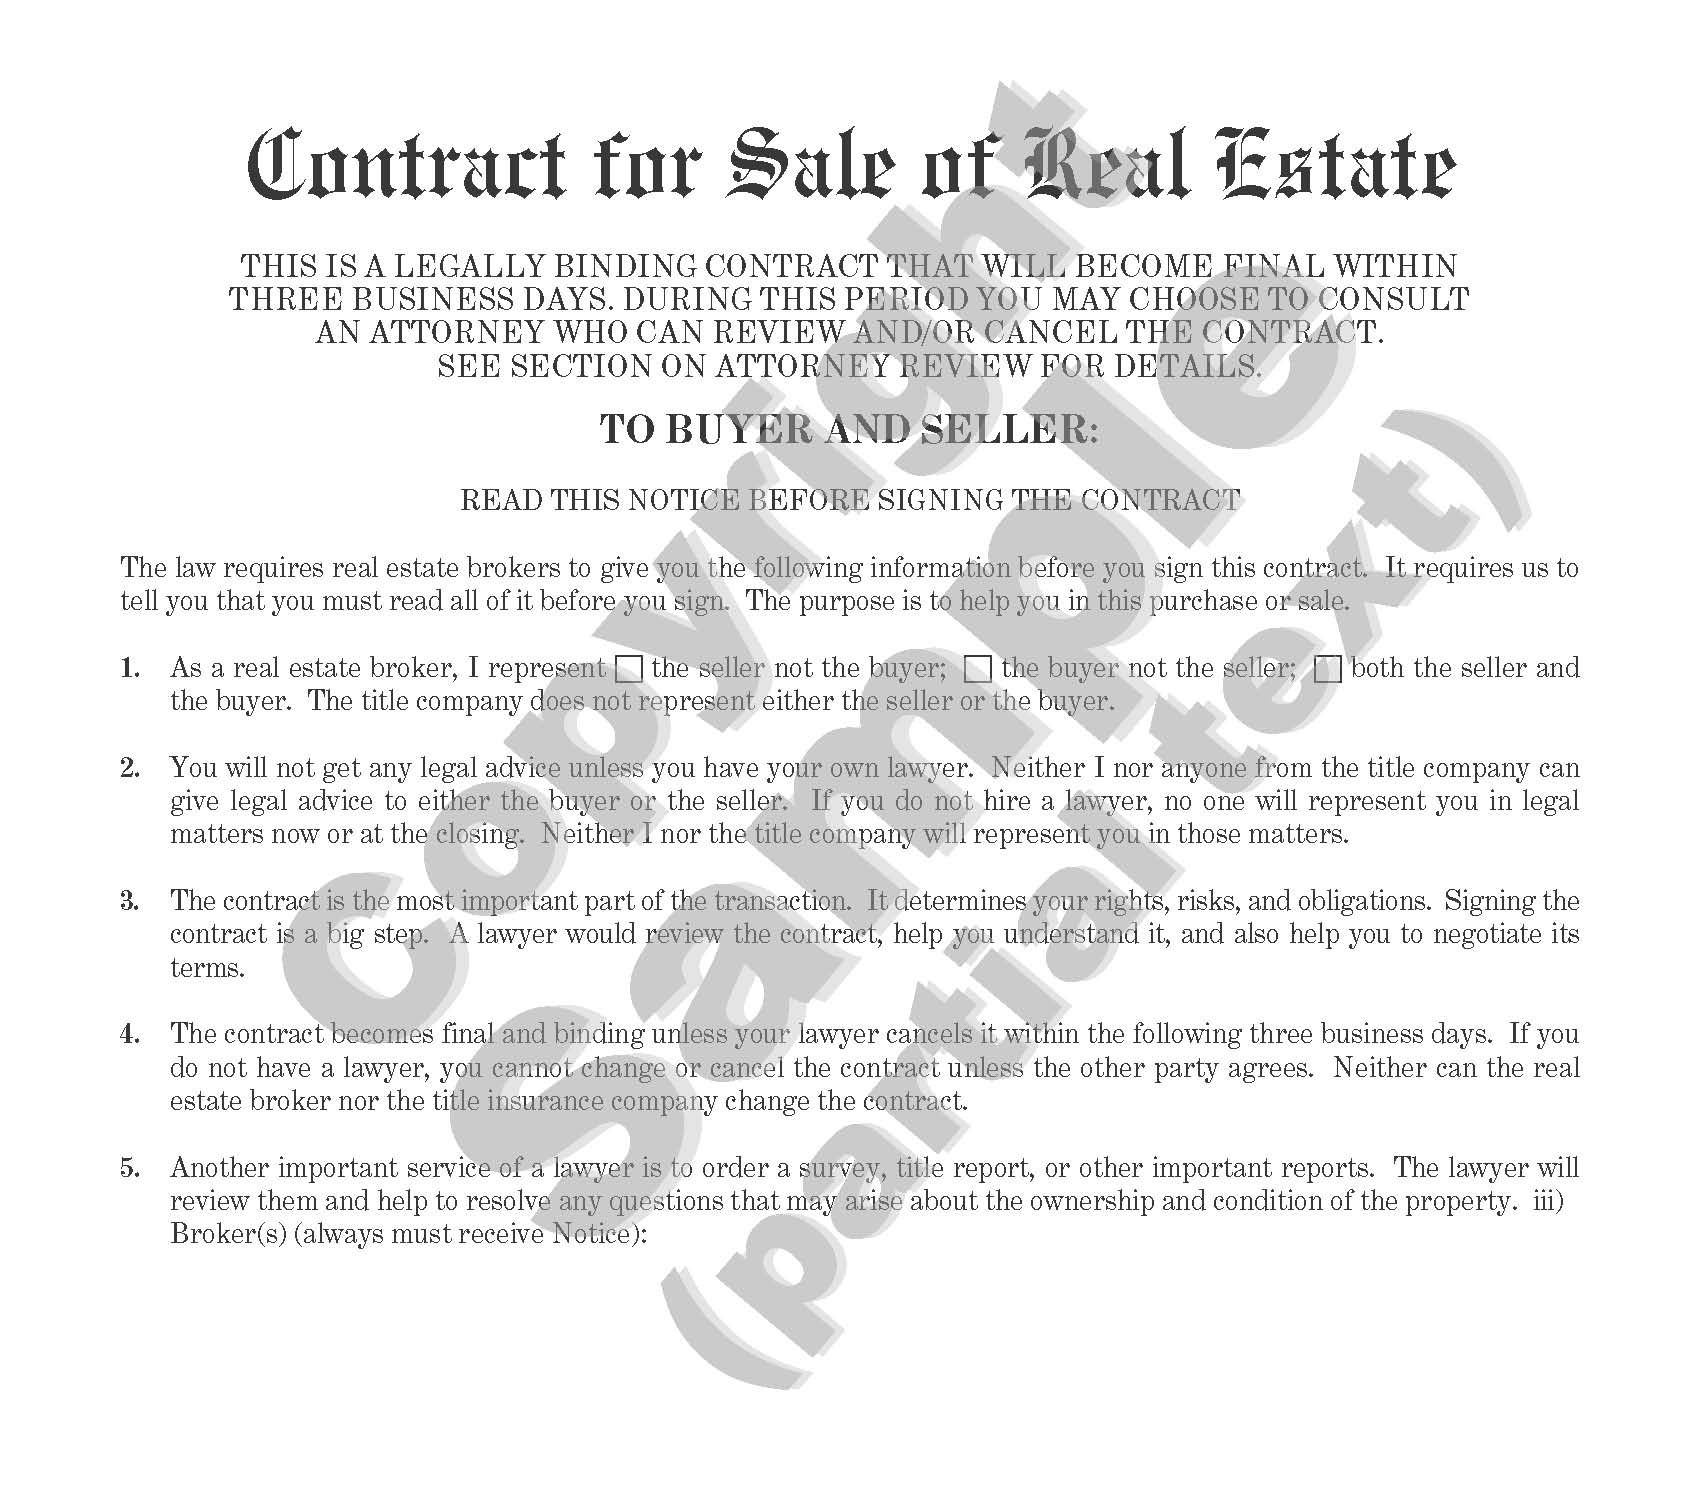 Contract for Sale of Real Estate - Broker's Version - Long Form - Individual or Corporate - Plain Language